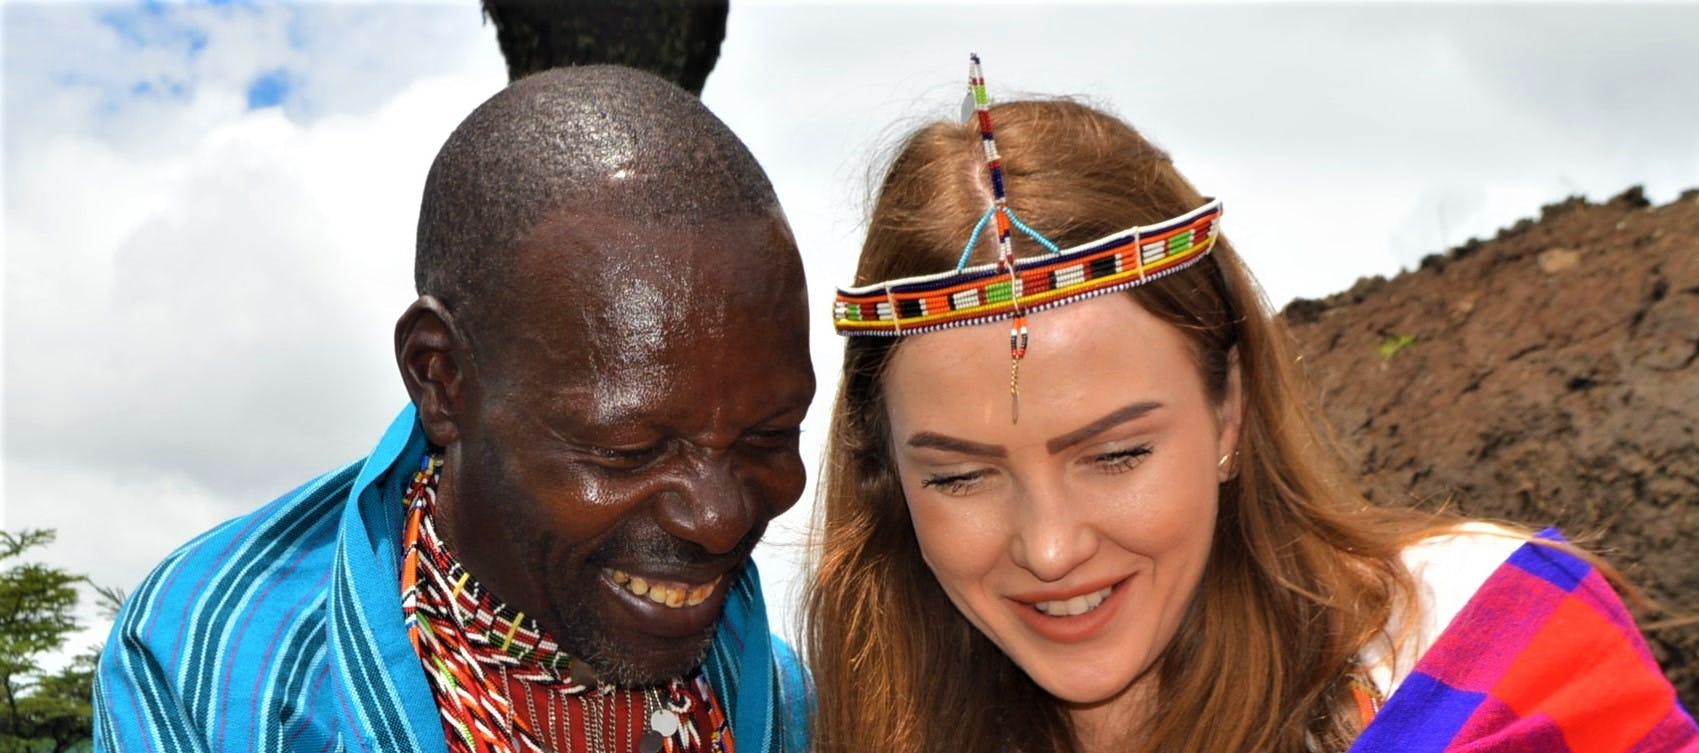 Maasai culture and traditions tour from Nairobi Musement